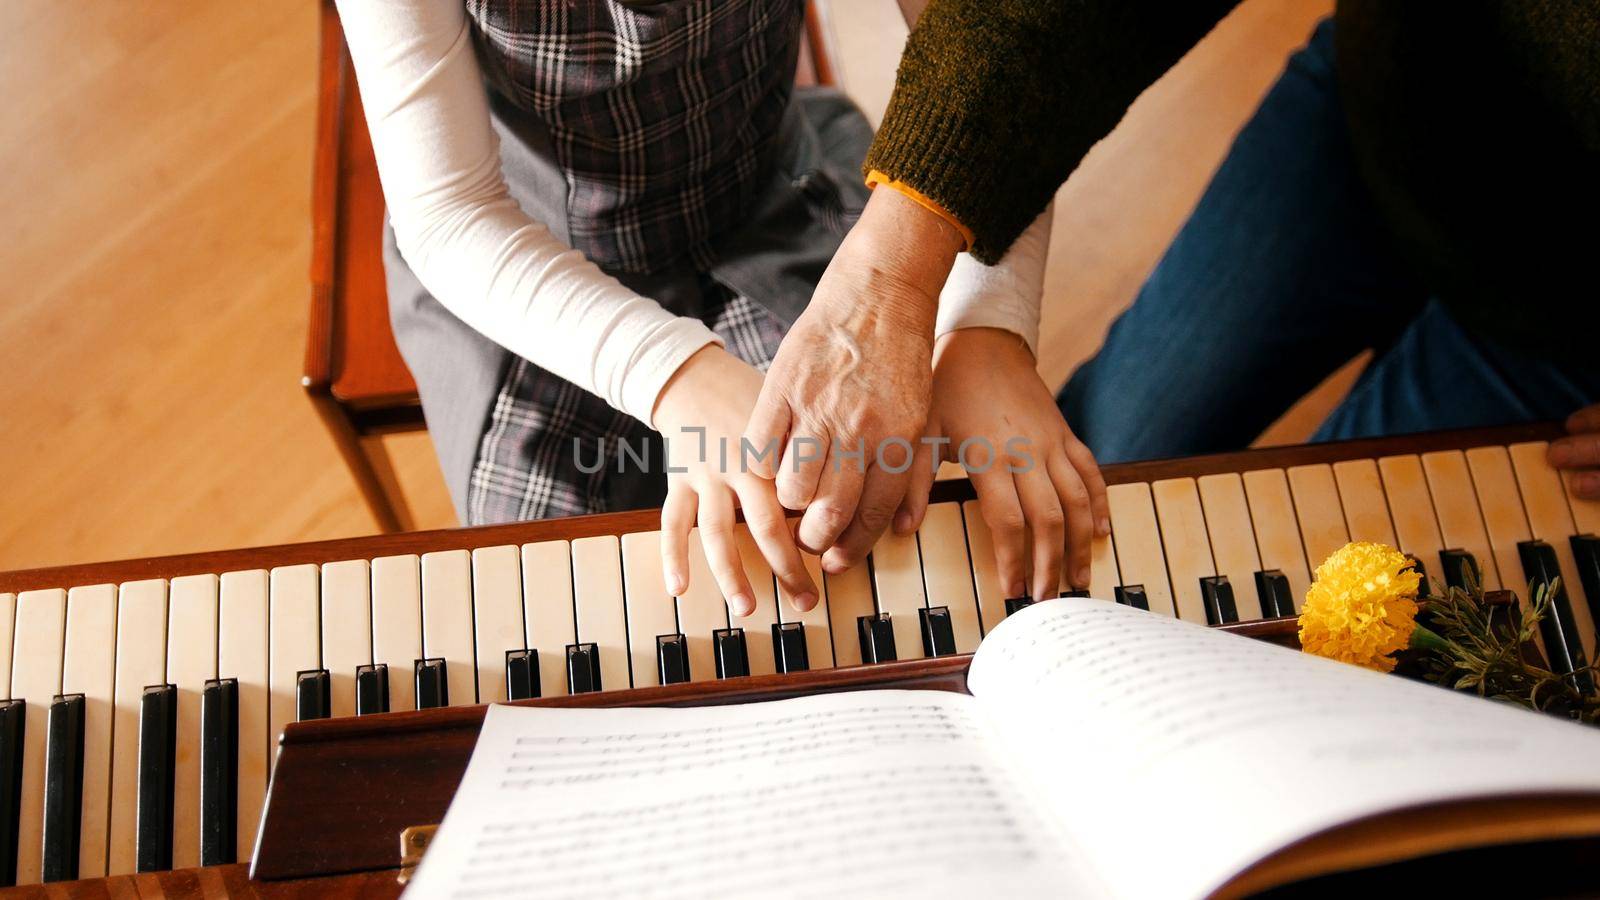 A little girl playing piano on music lesson. A teacher helping her. Hands close up